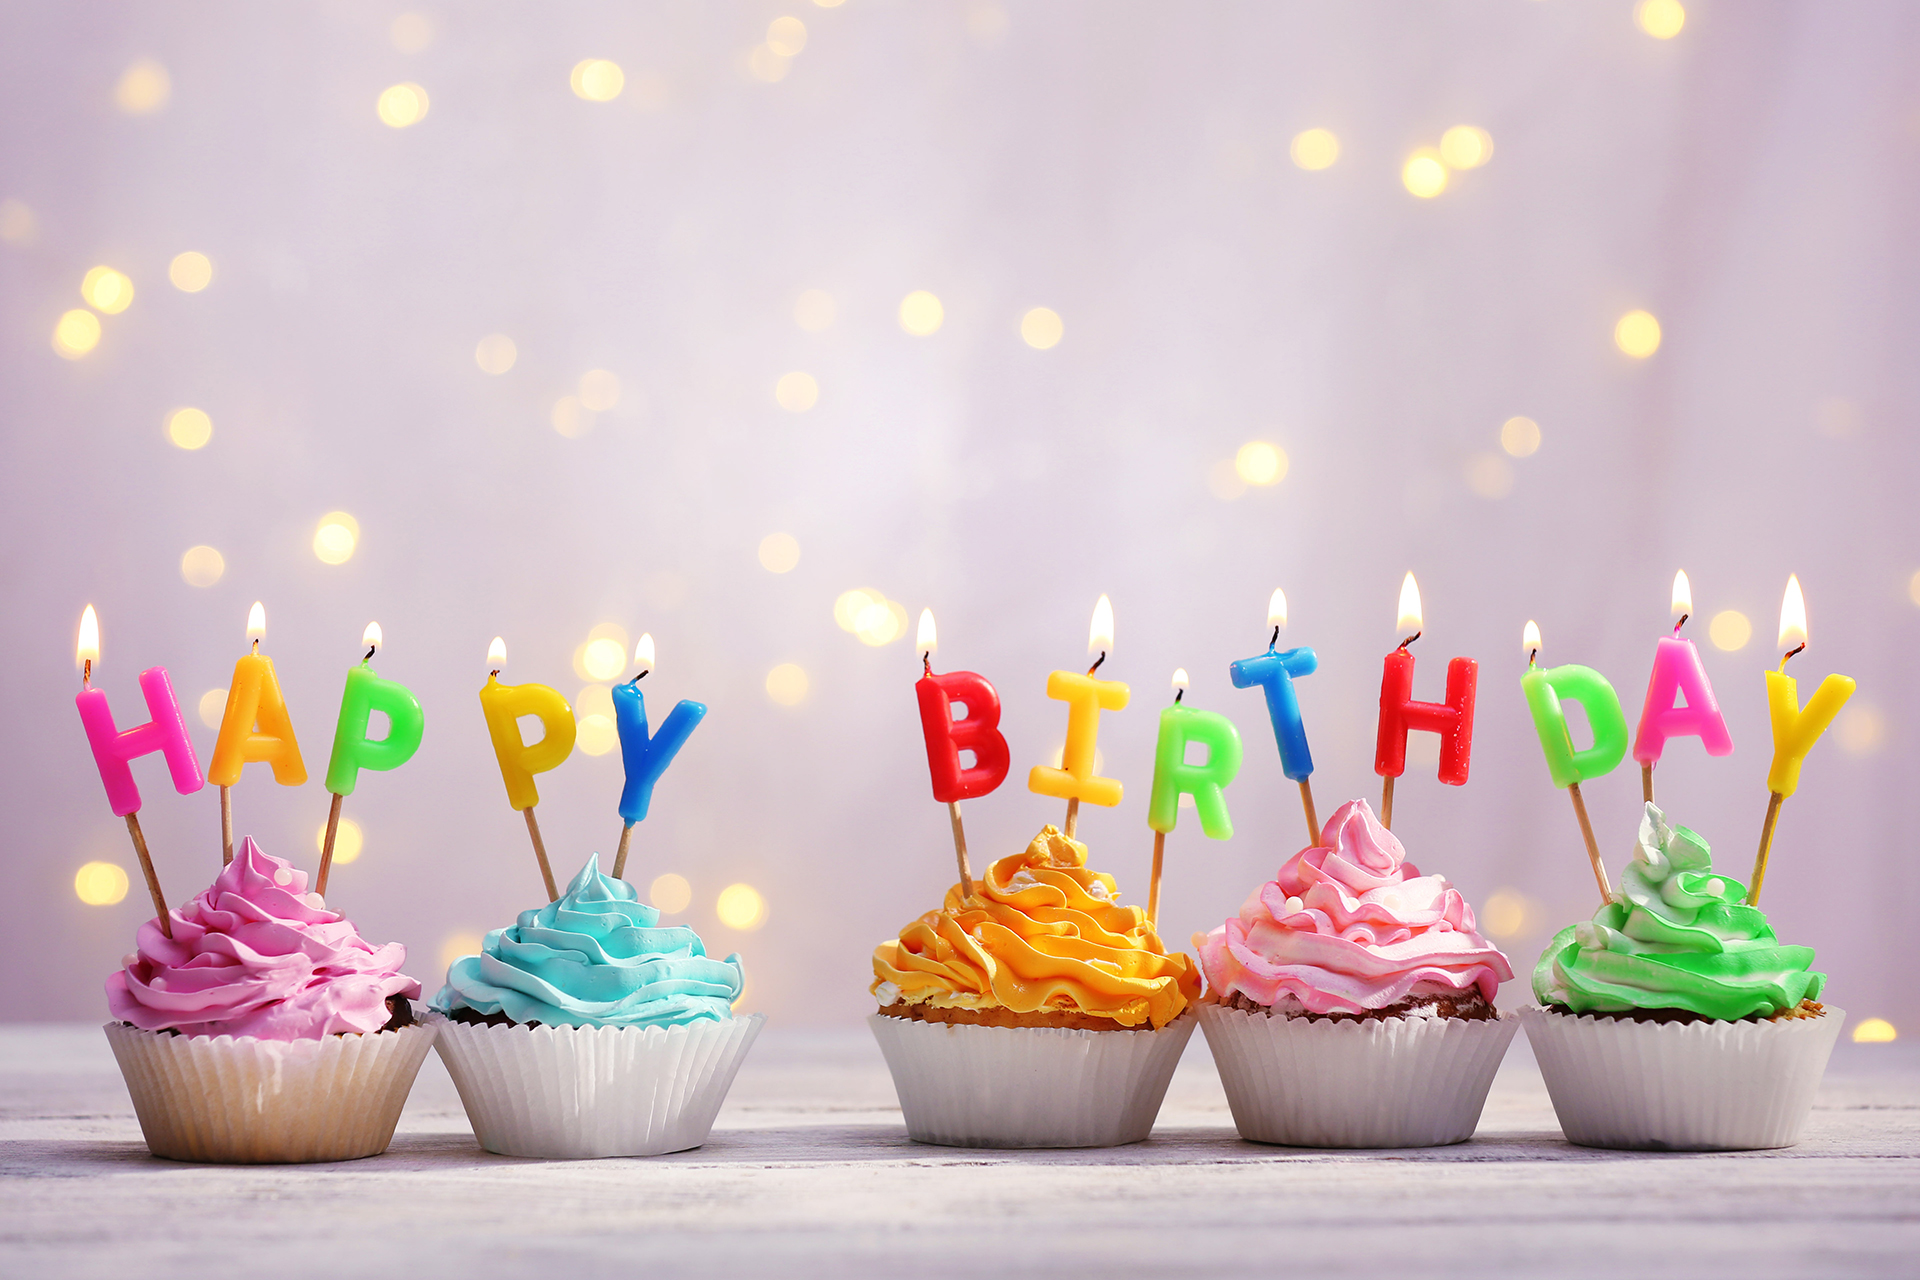 Download a meaningful happy birthday wallpaper images